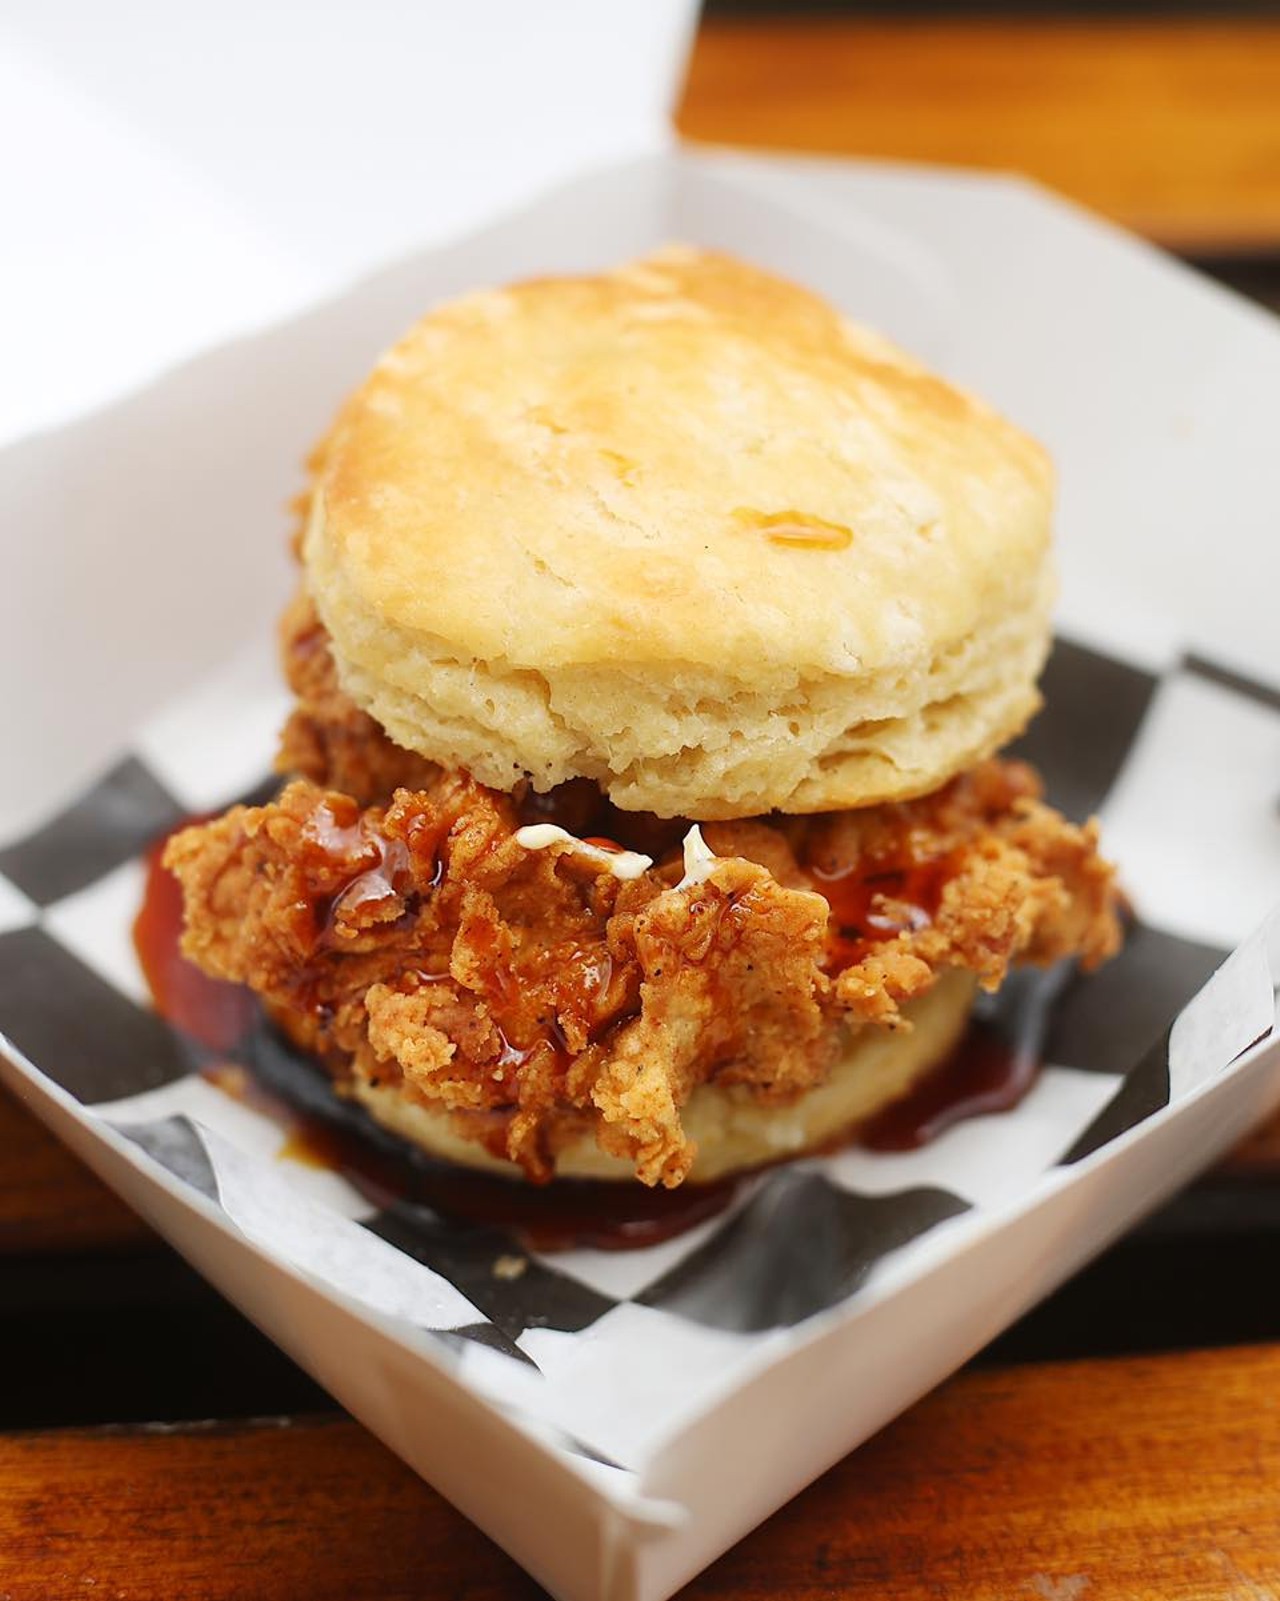 Winter Park Biscuit CO. 
3201 CORRINE DR. ORLANDO, FL 32803
This delicious haven of biscuits has so many options that are to die for; they have a truffle butter biscuit and even biscuits and gravy. But a must try is their Crispy Chik&#146; sandwich. 
Photo via Winter Park Biscuit CO./Facebook